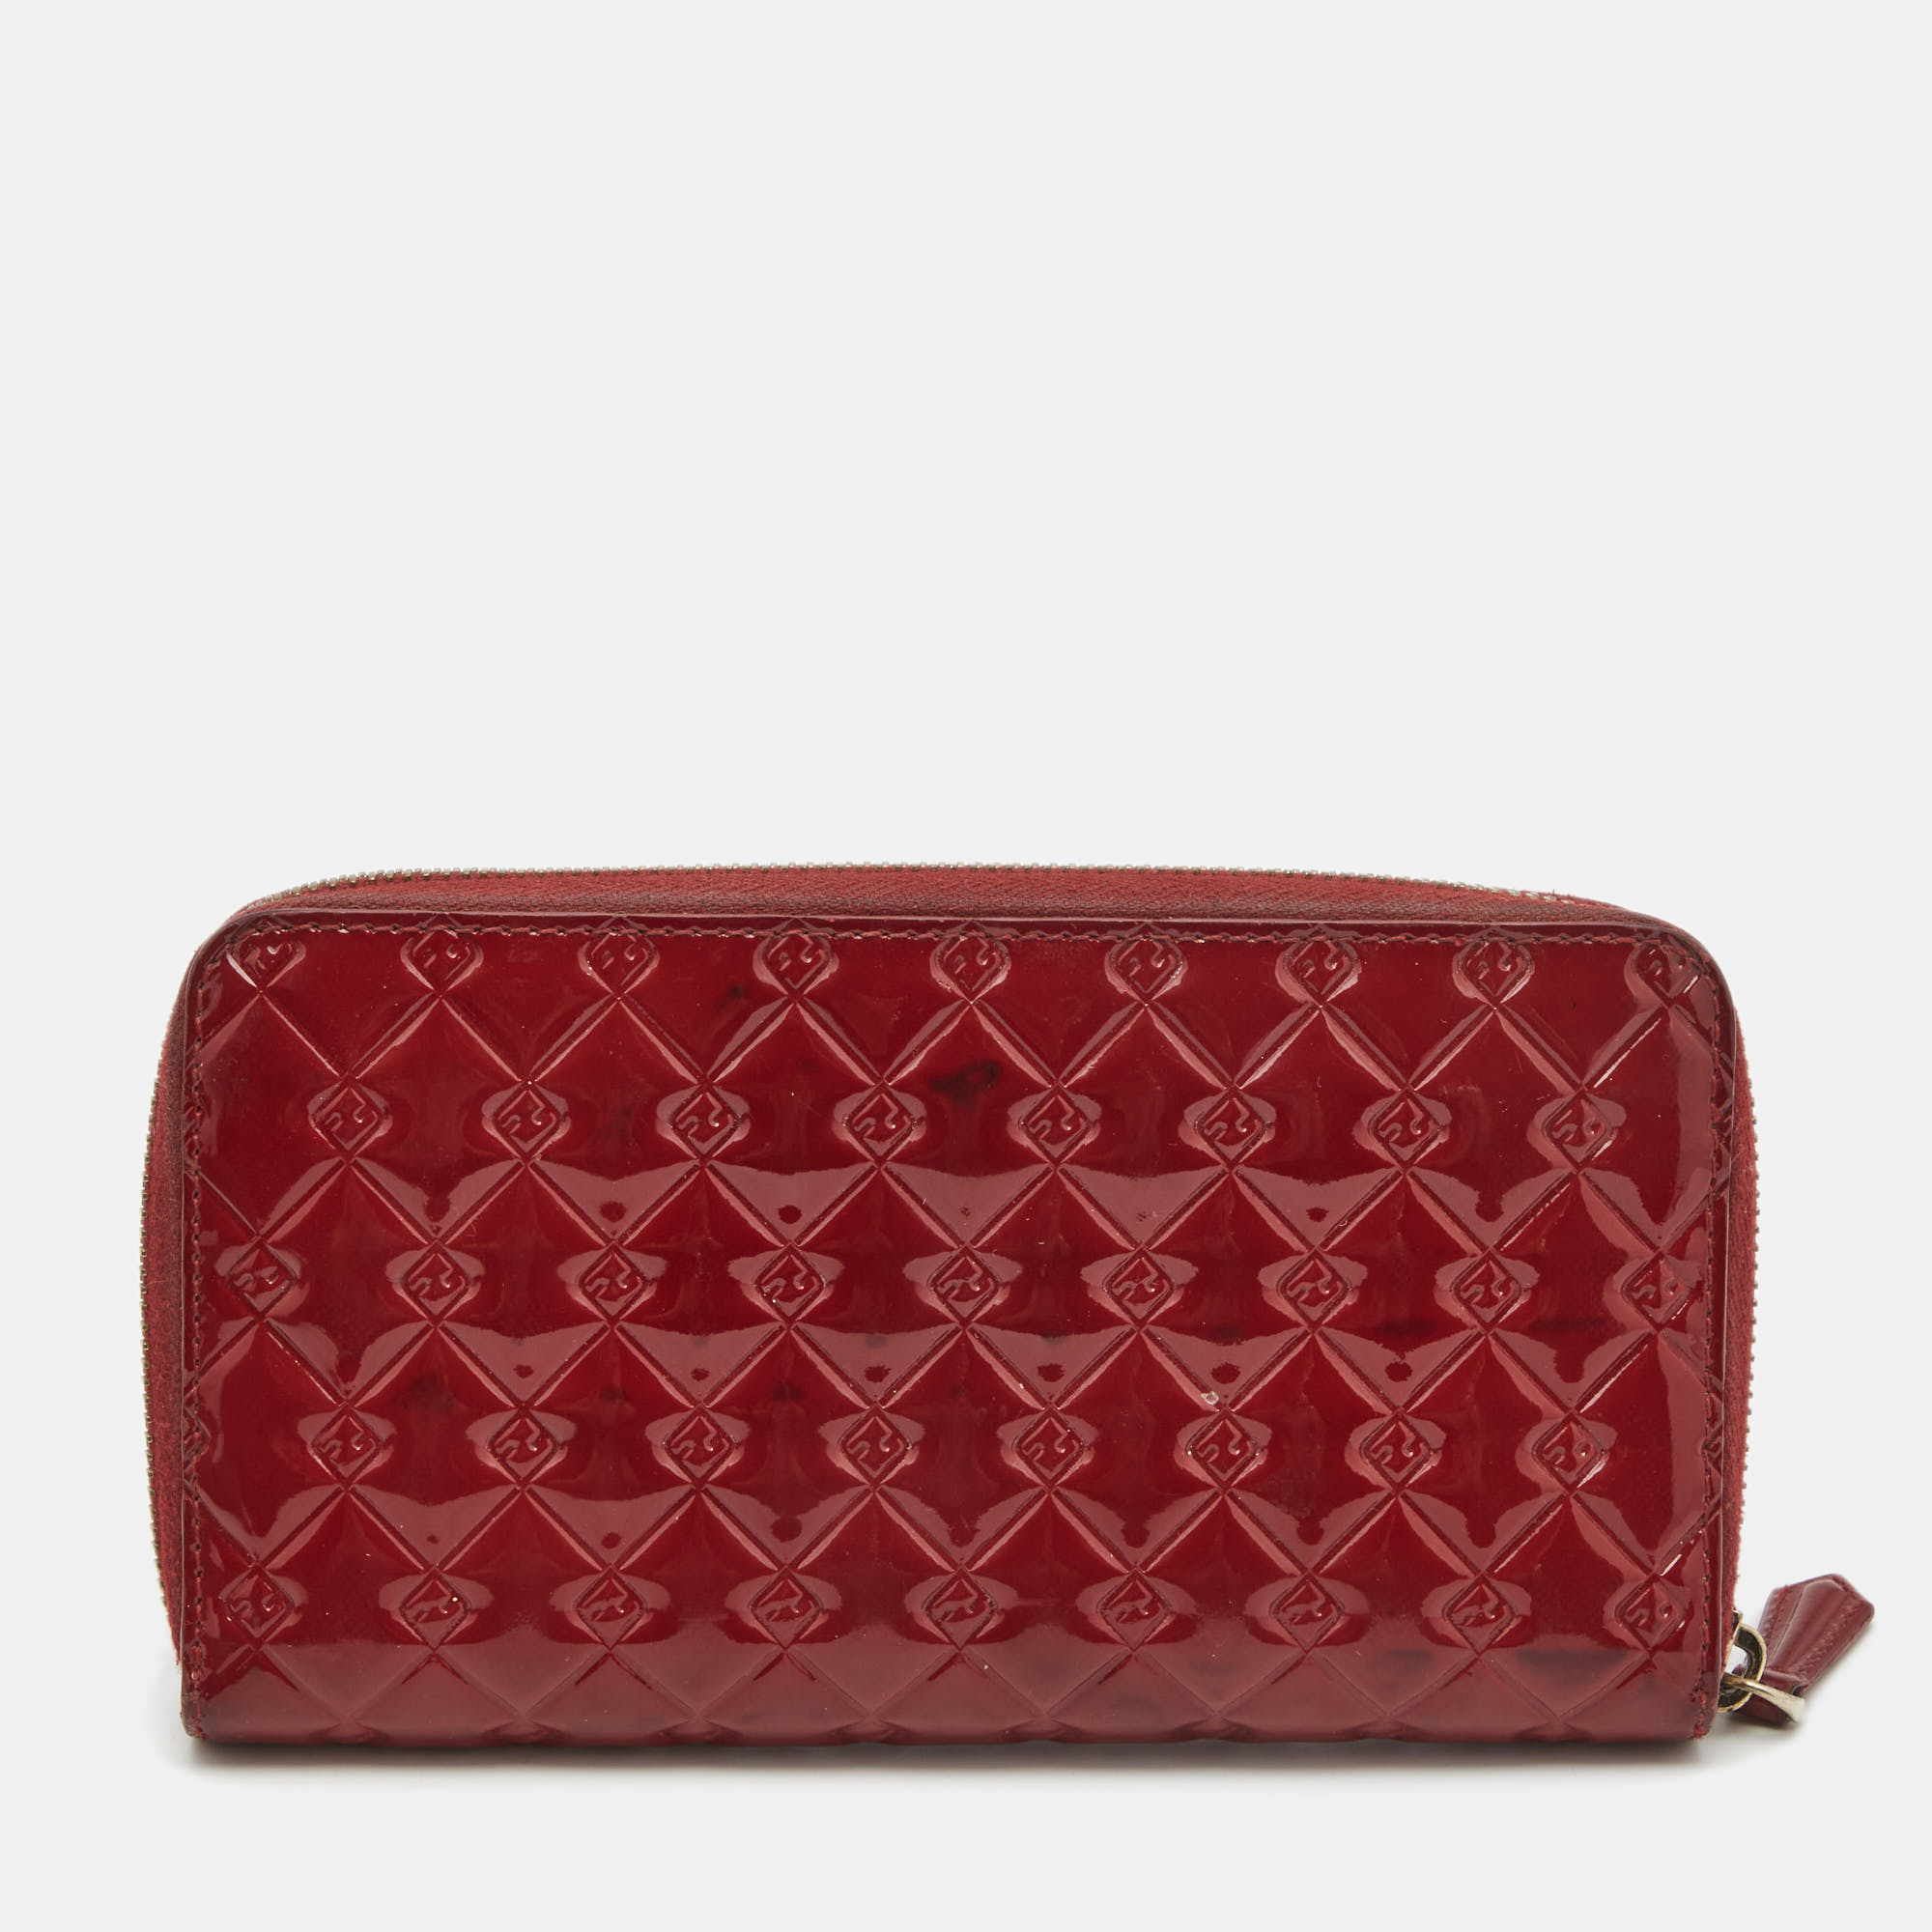 Fendi Red Patent Leather Fendilicious Continental Wallet